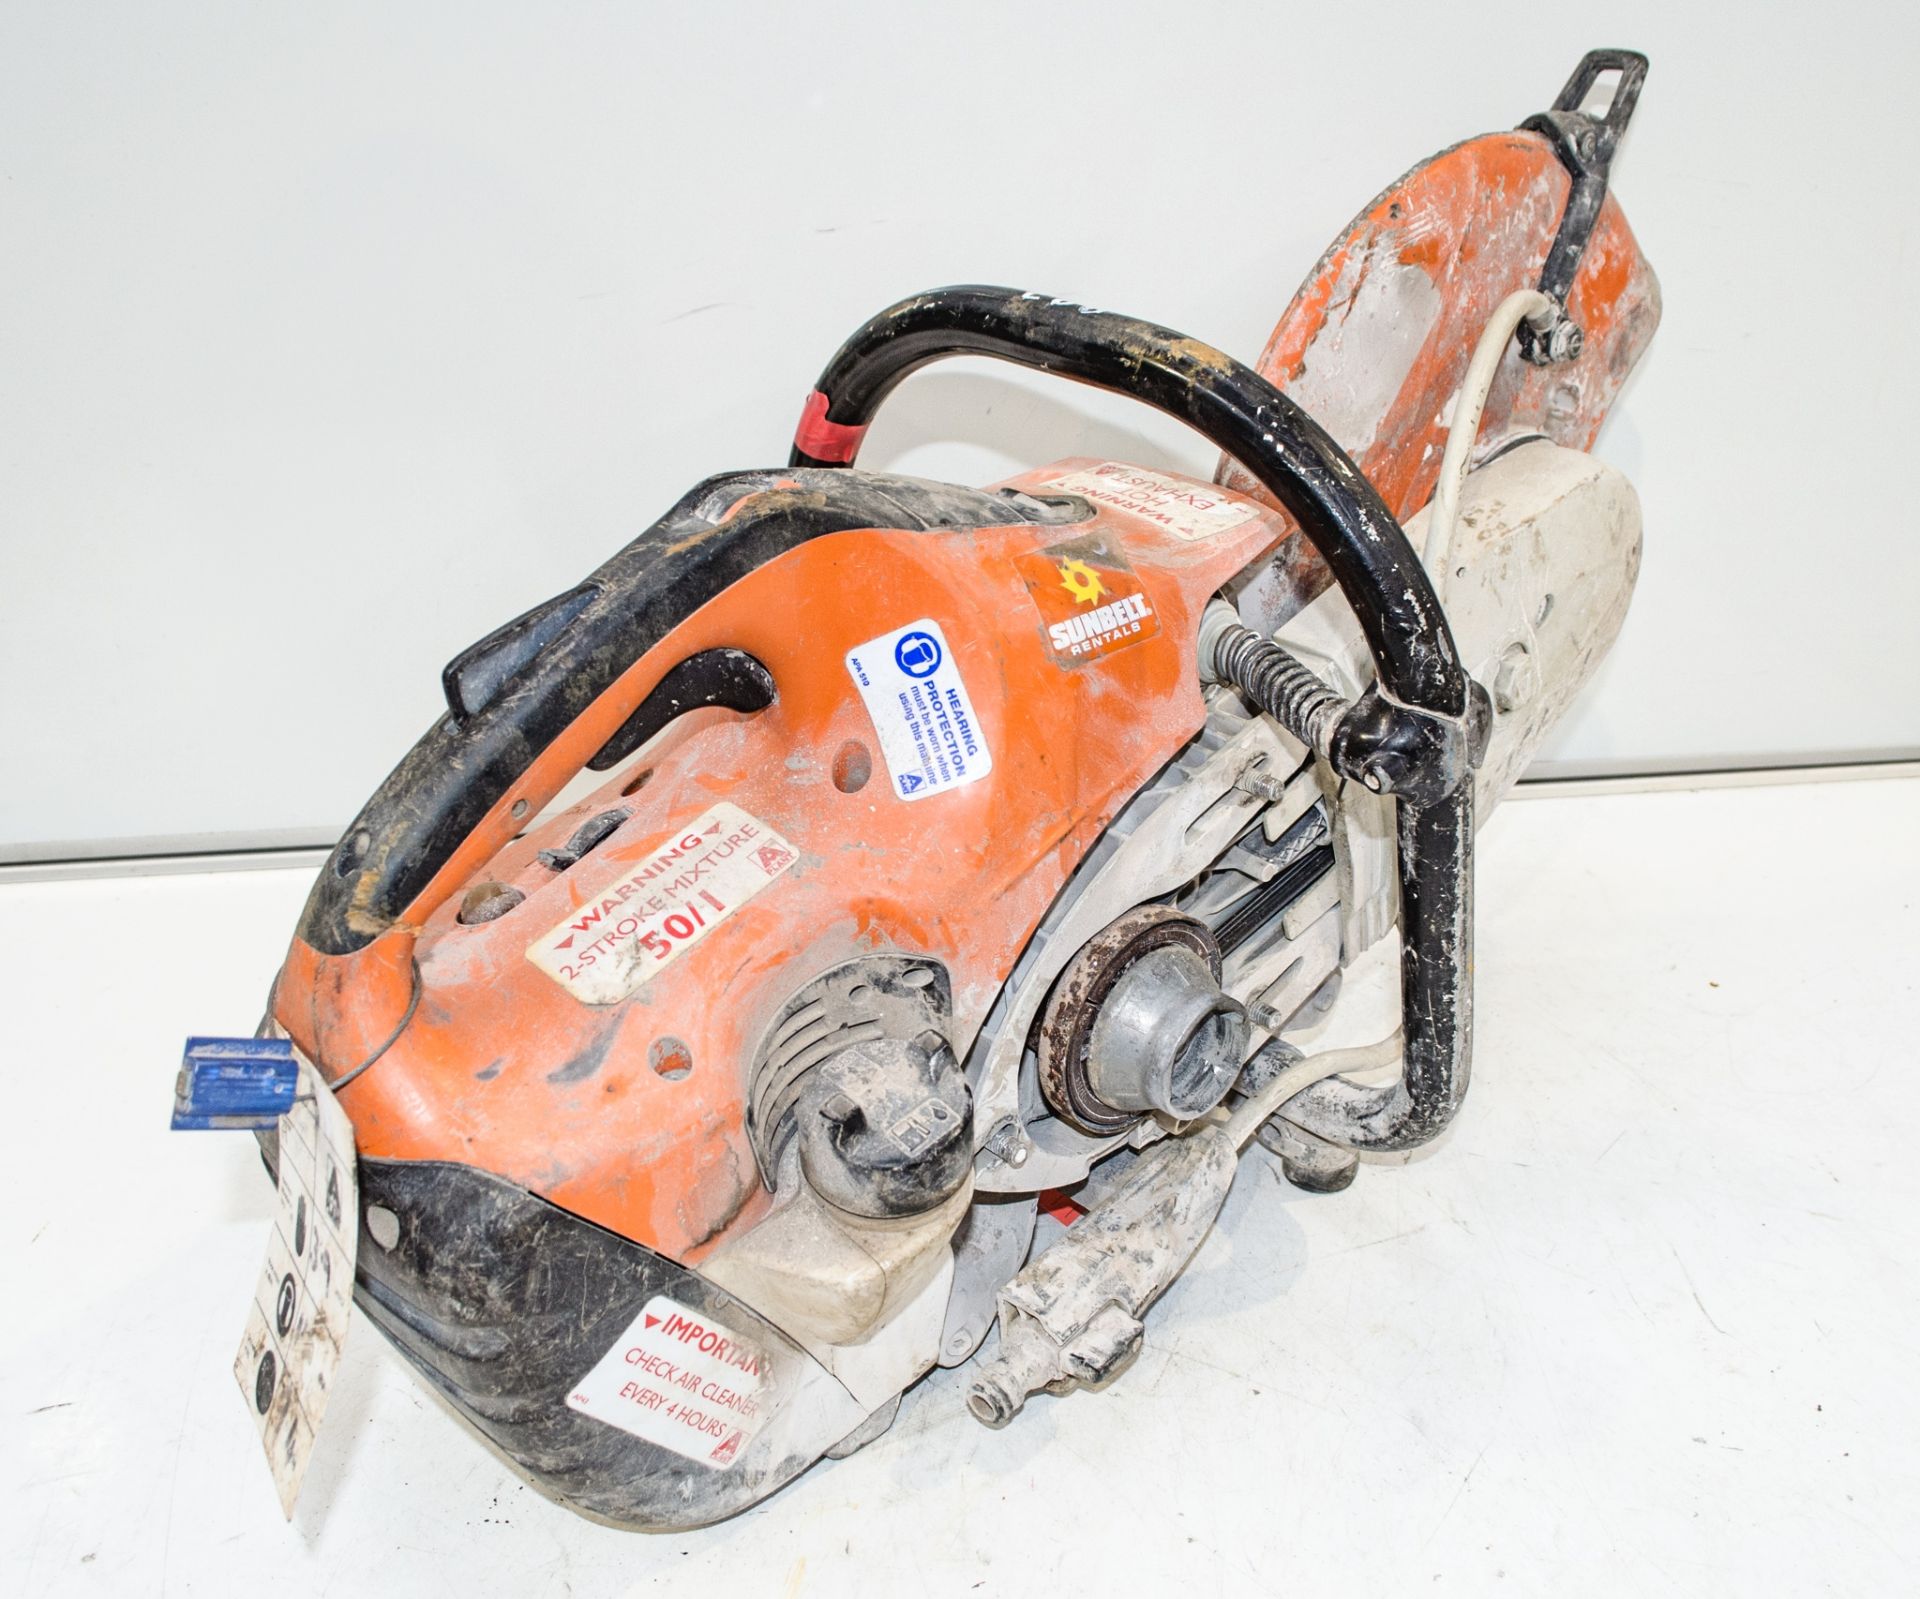 Stihl TS410 petrol driven cut off saw A775686 ** Pull cord assembly missing ** - Image 2 of 2